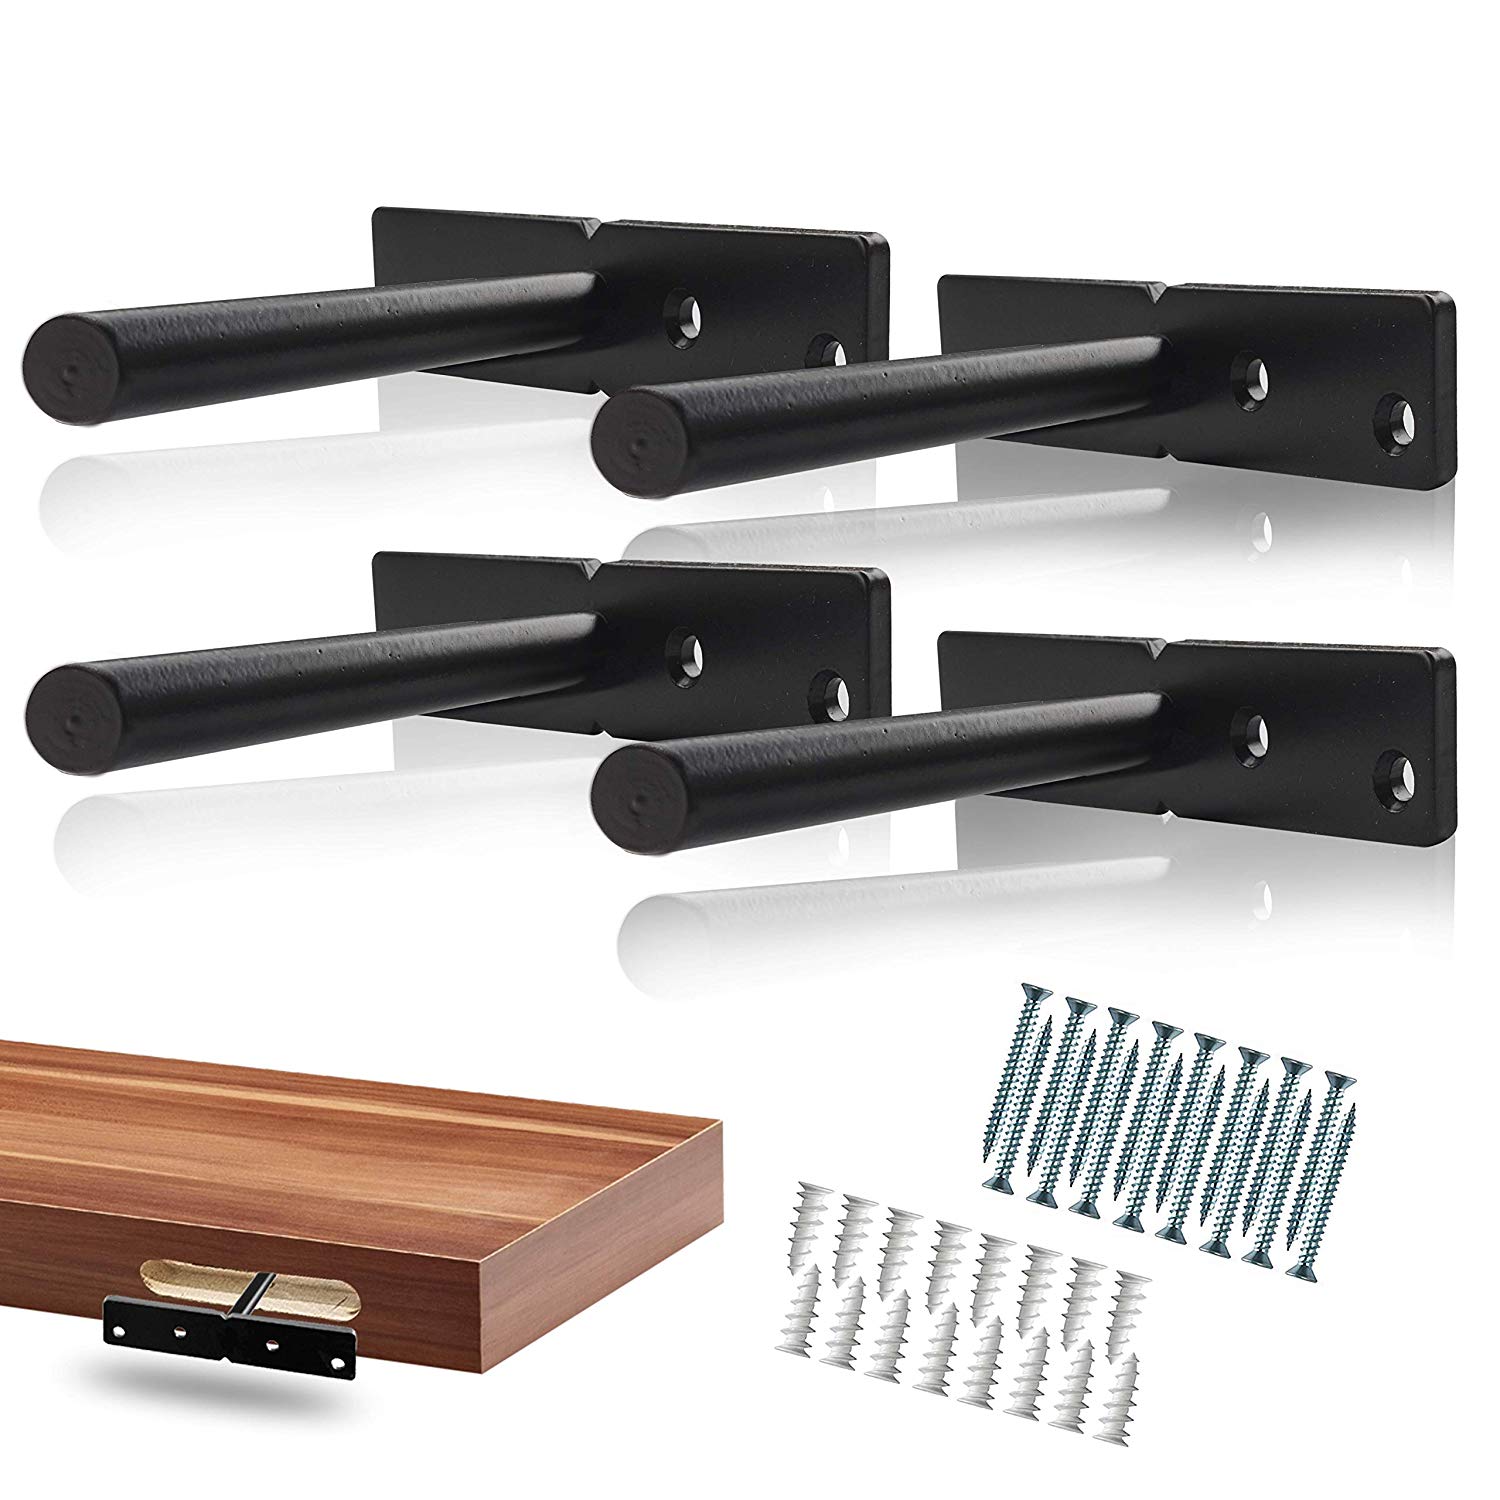 floating shelf bracket black heavy duty inch pack steel invisible blind hidden supports for wood screws wall plugs included best space saving making shelves mounted coat rack and